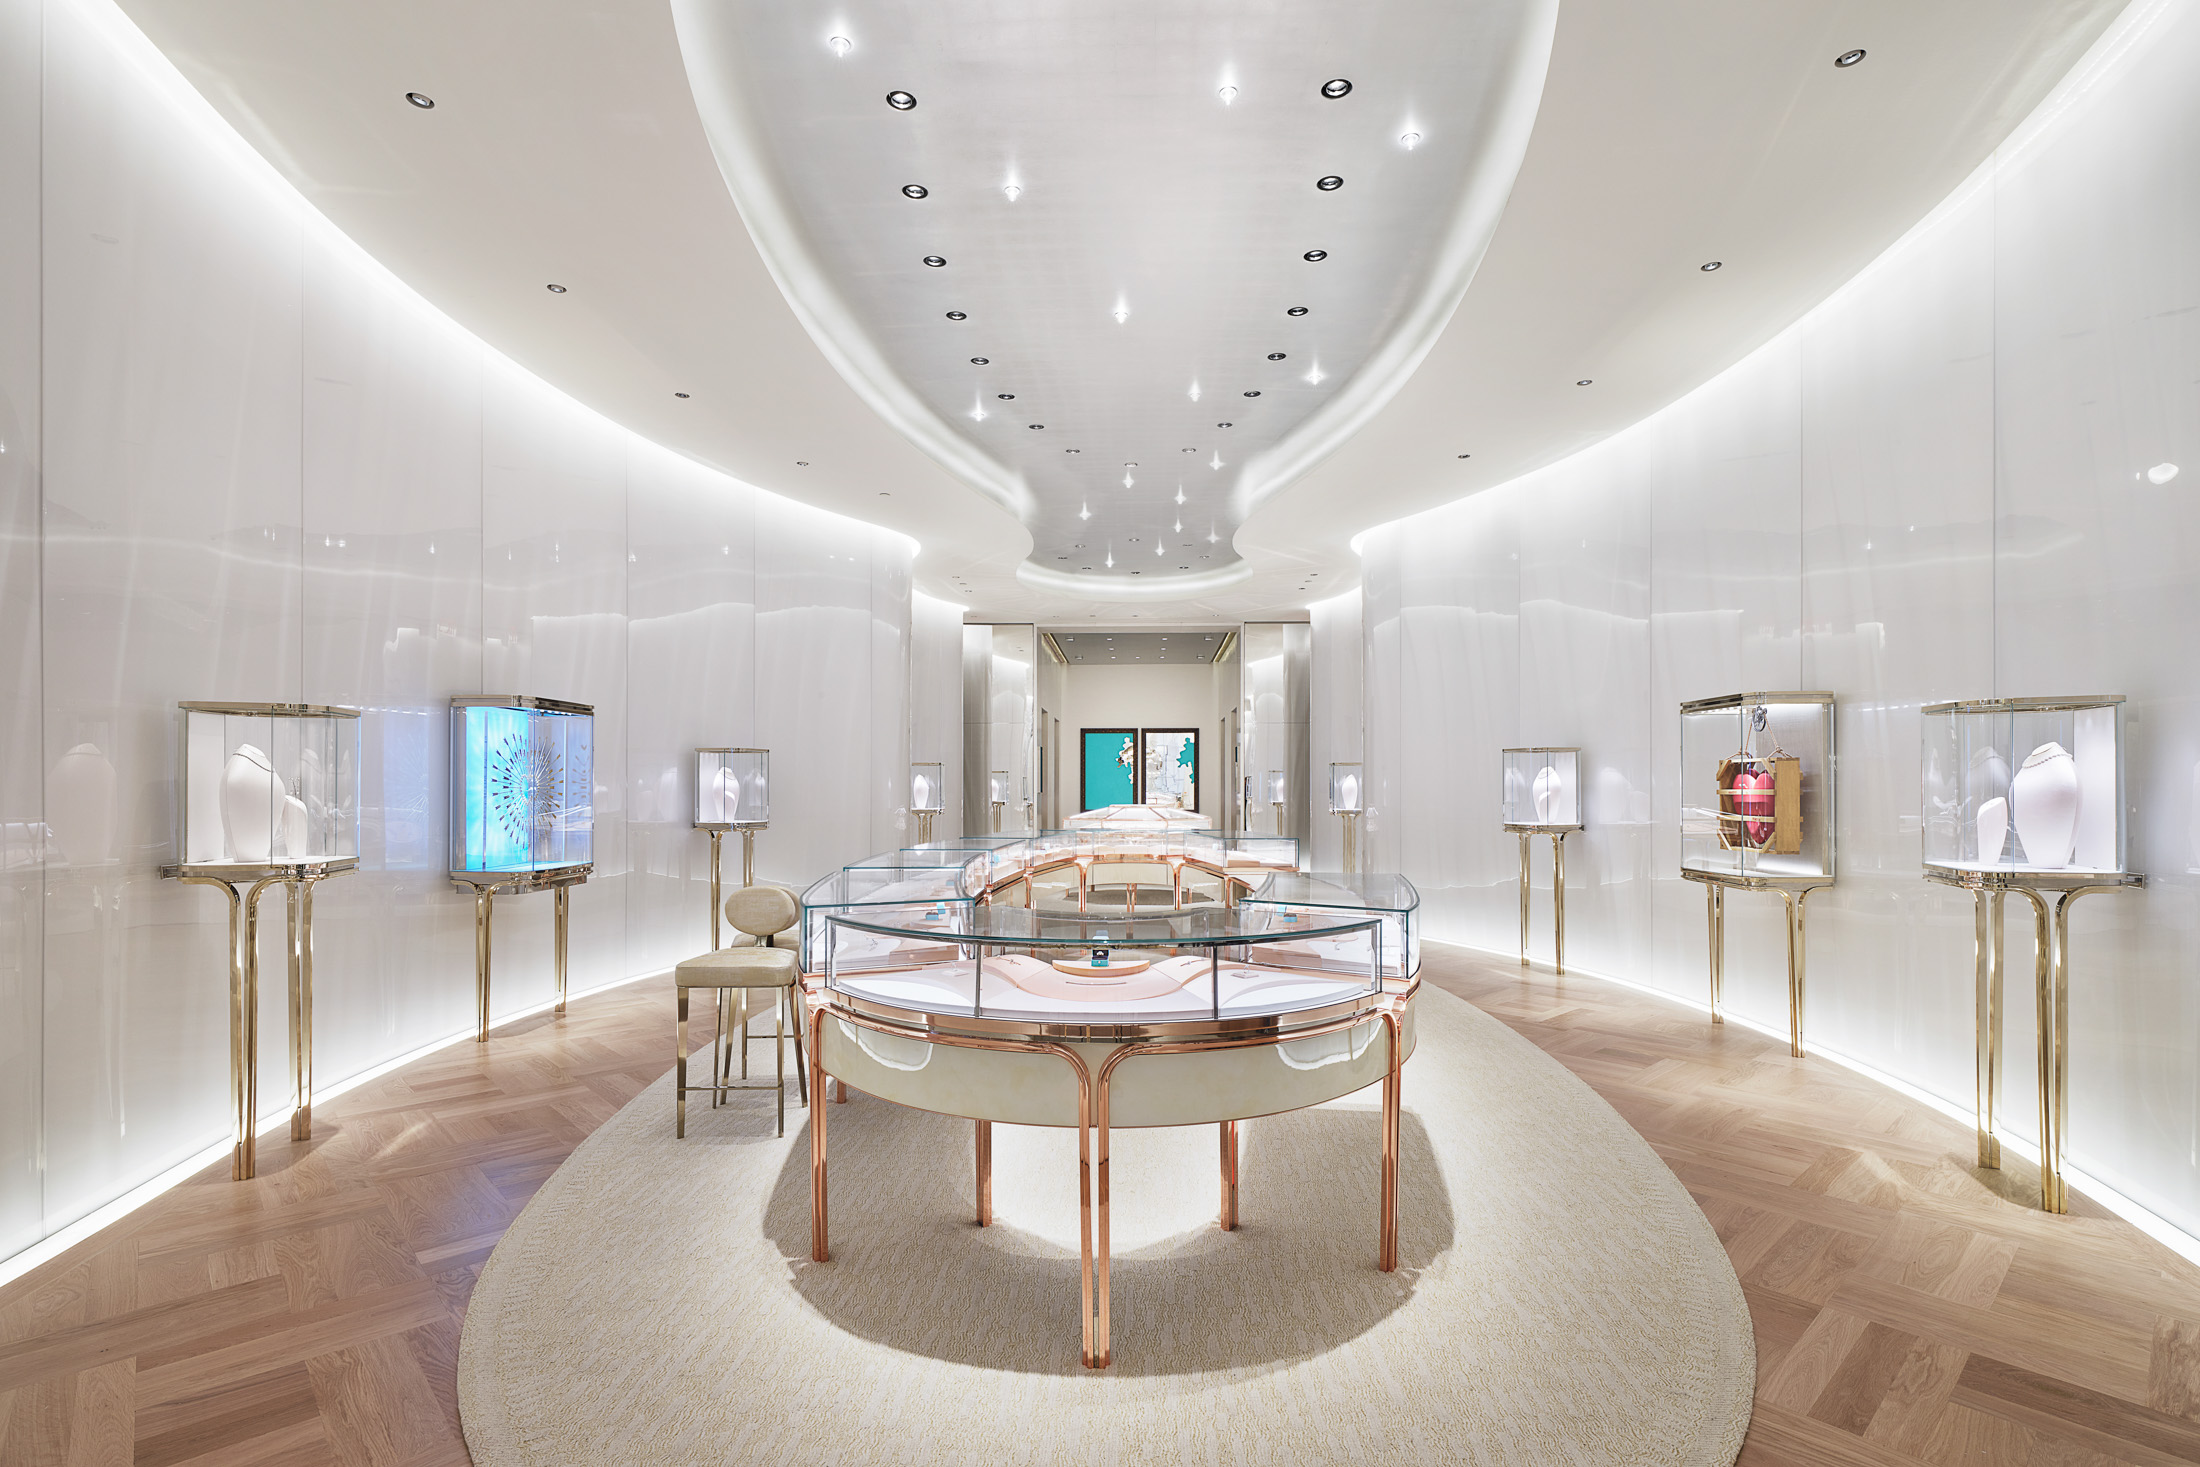 Tiffany & Co flagship store to open up at Champs Elysees, Paris